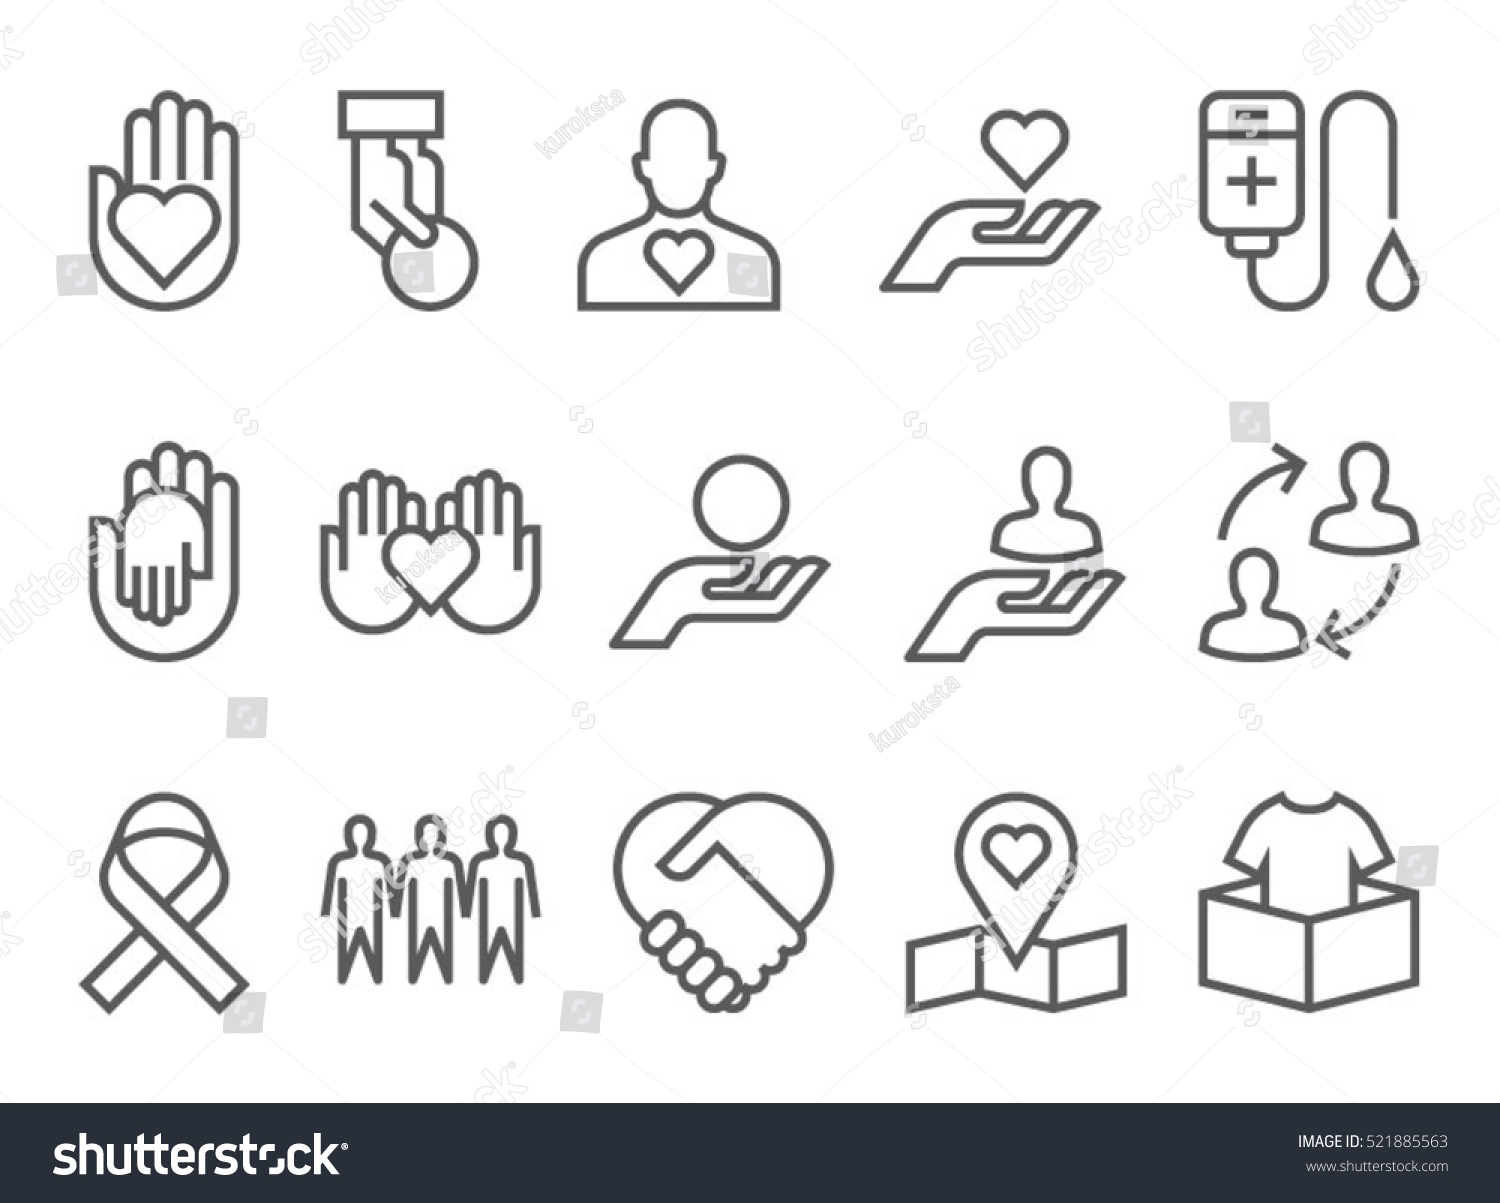 Charity, donation and volunteer work concept icons, thin line style, flat design. giving help, donating money, clothing, food, medicines. #521885563